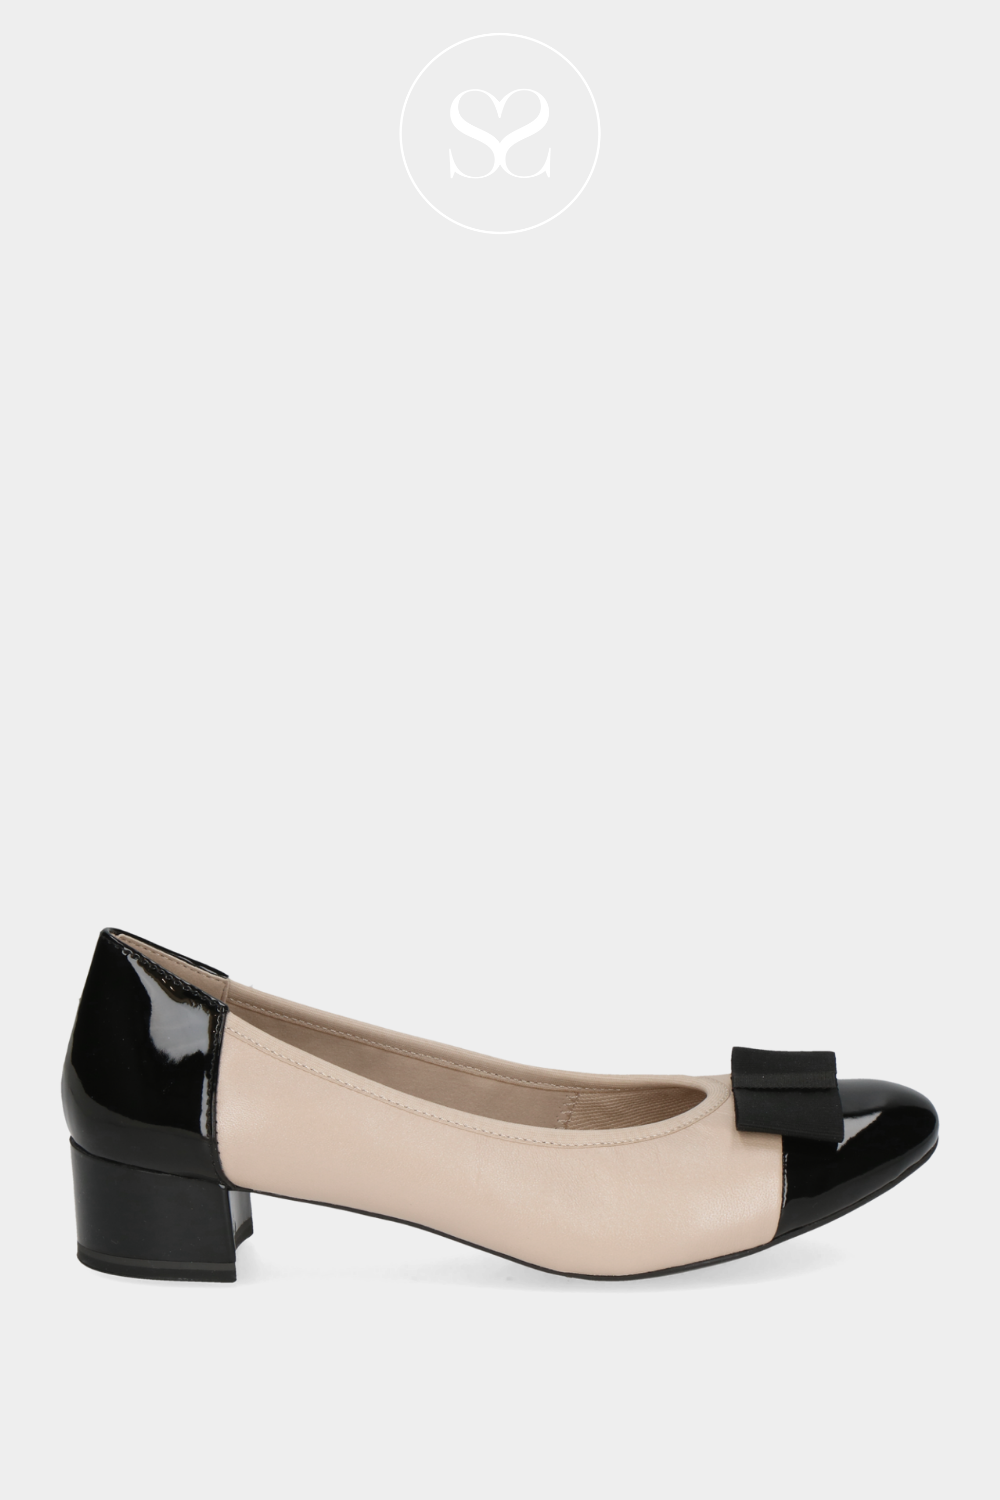 CAPRICE 9-22307-42 BLACK AND CREAM HEELED PUMP. LOW HEEL SHOE WITH BLACK BOW 